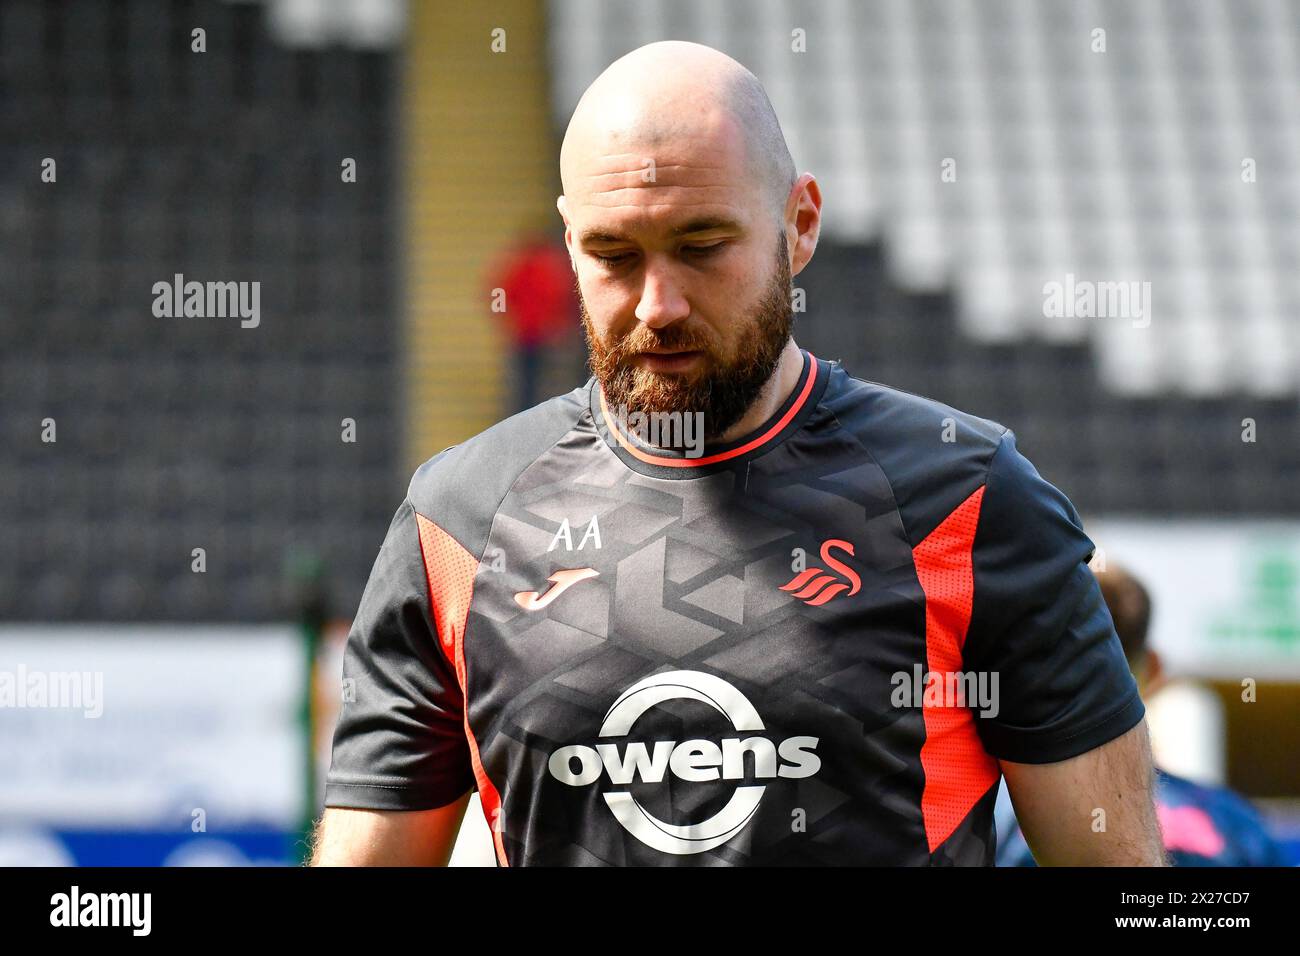 Swansea, Wales. 20 April 2024. Alun Andrews Swansea City Academy Physical Development Coach during the pre-match warm-up before the Under 21 Professional Development League match between Swansea City and Bristol City at the Swansea.com Stadium in Swansea, Wales, UK on 20 April 2024. Credit: Duncan Thomas/Majestic Media/Alamy Live News. Stock Photo